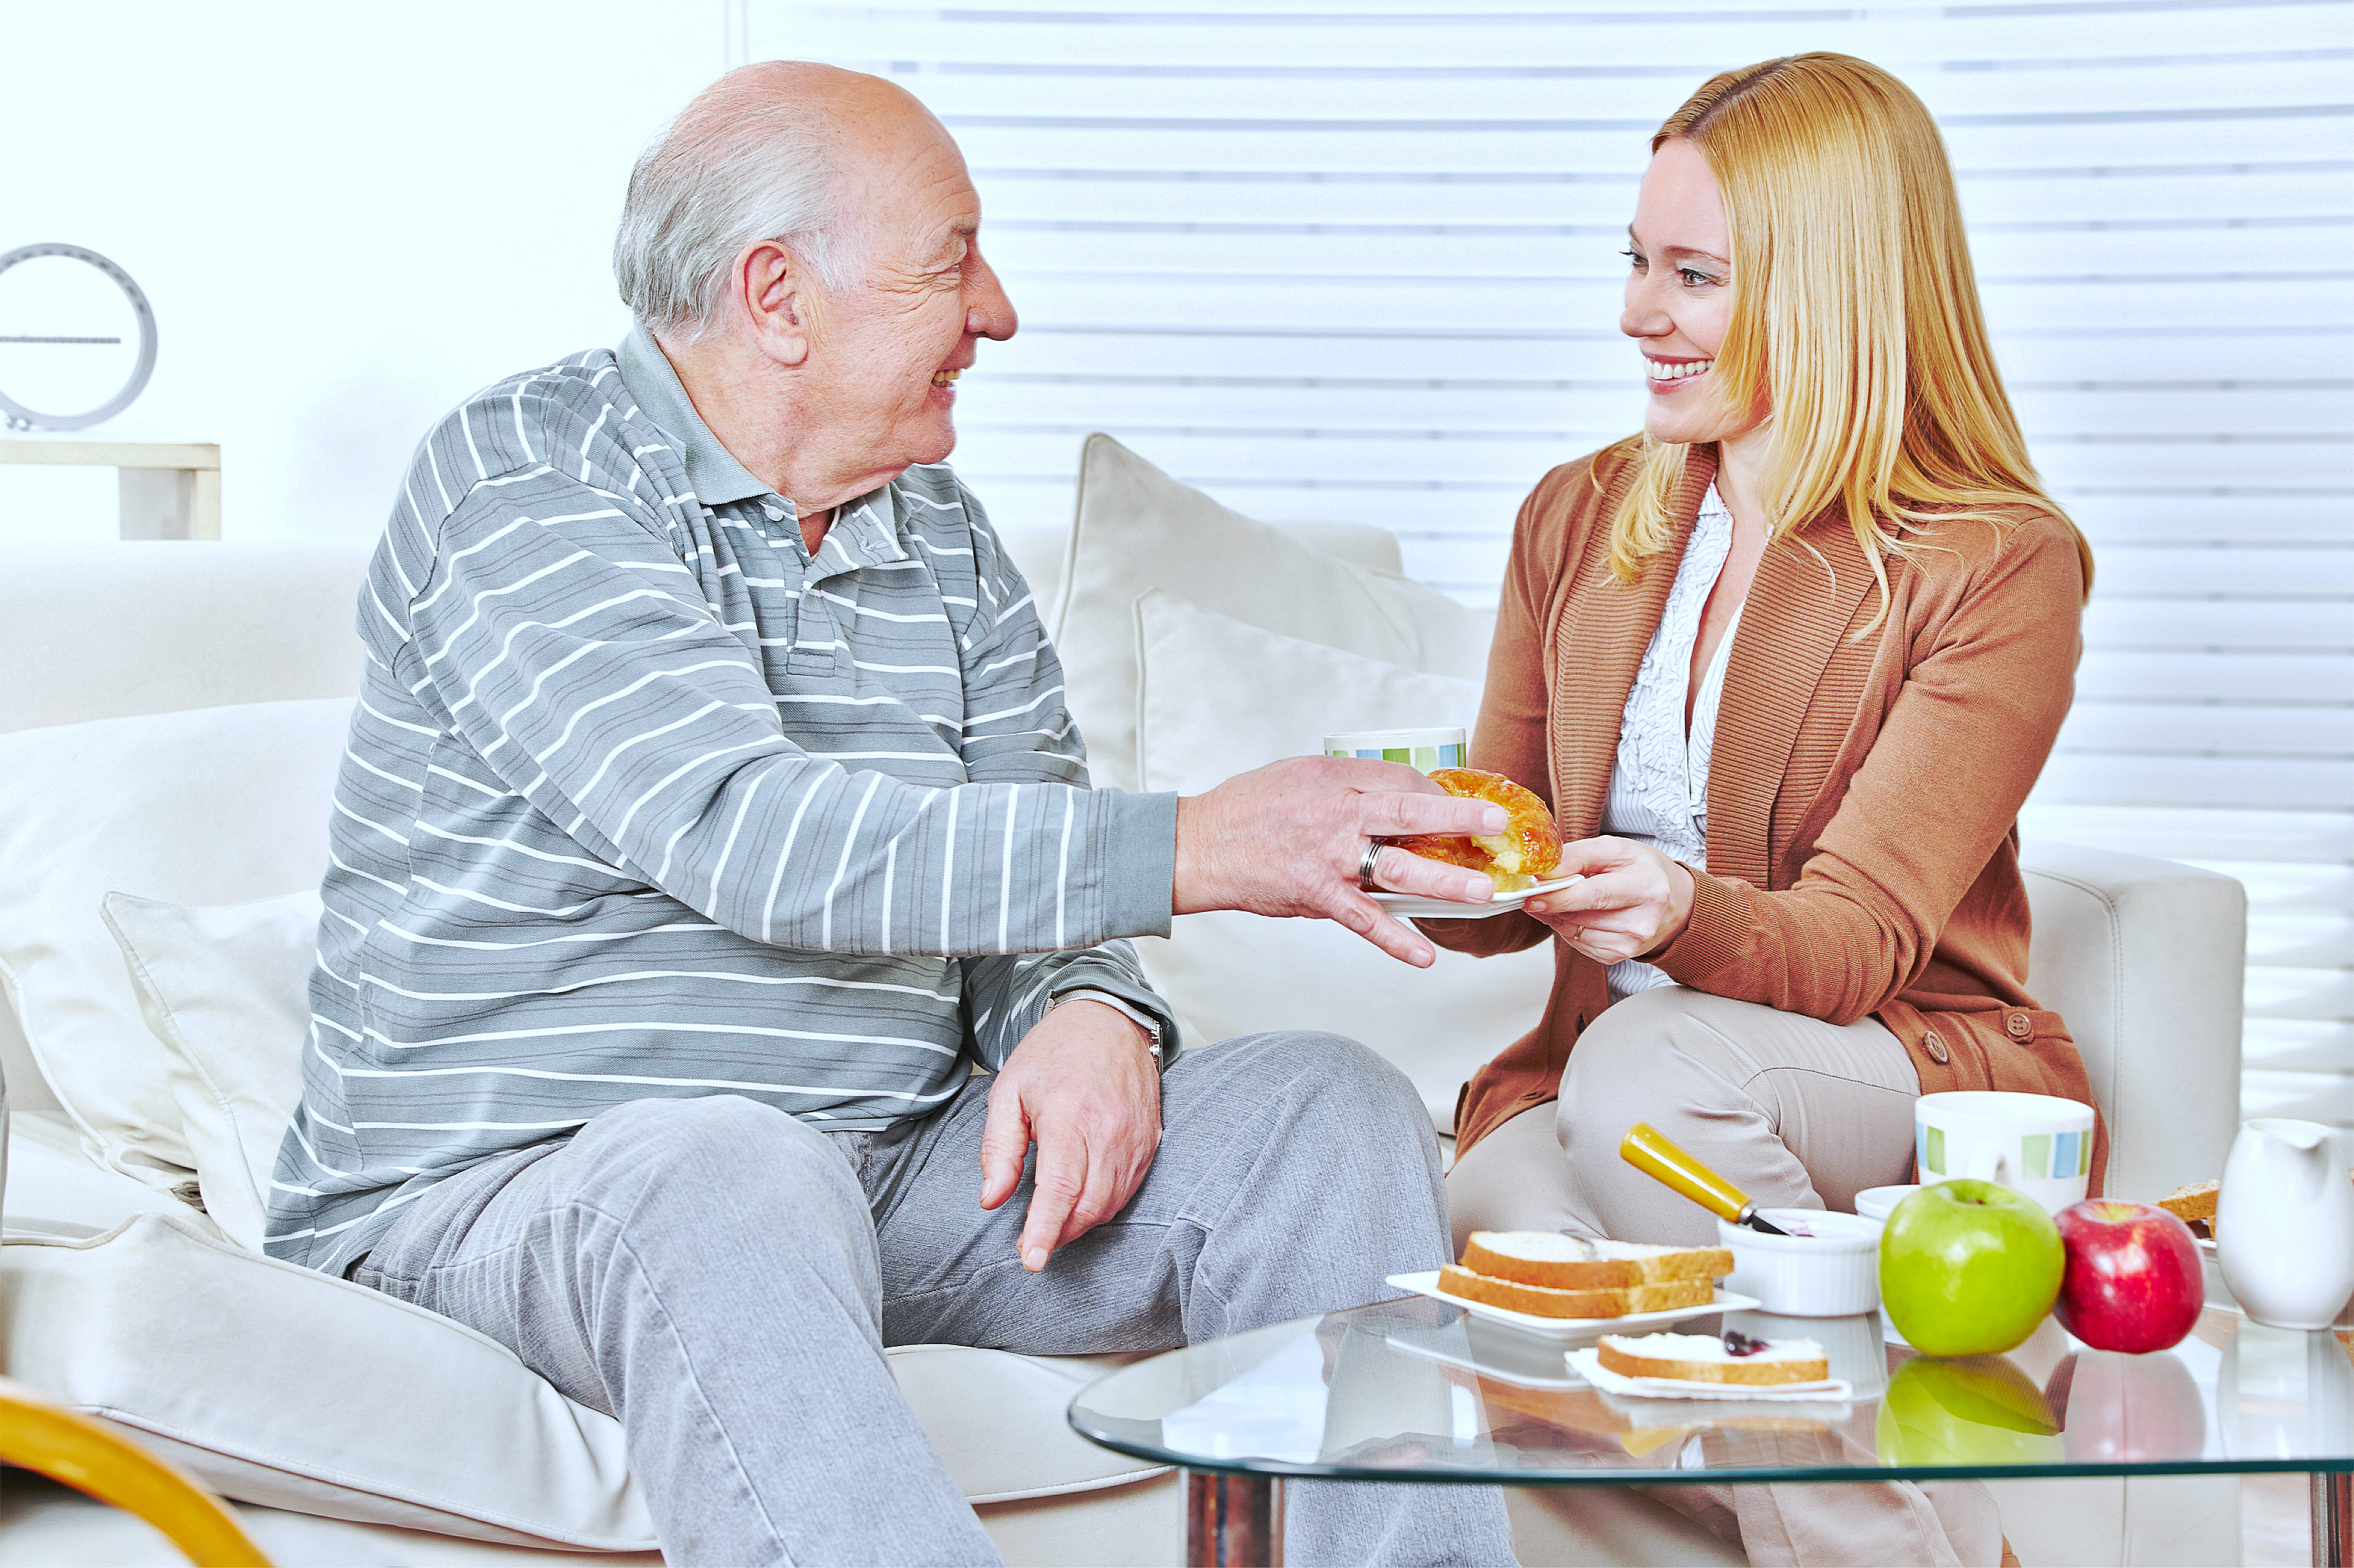 A caregiver giving food to the patient